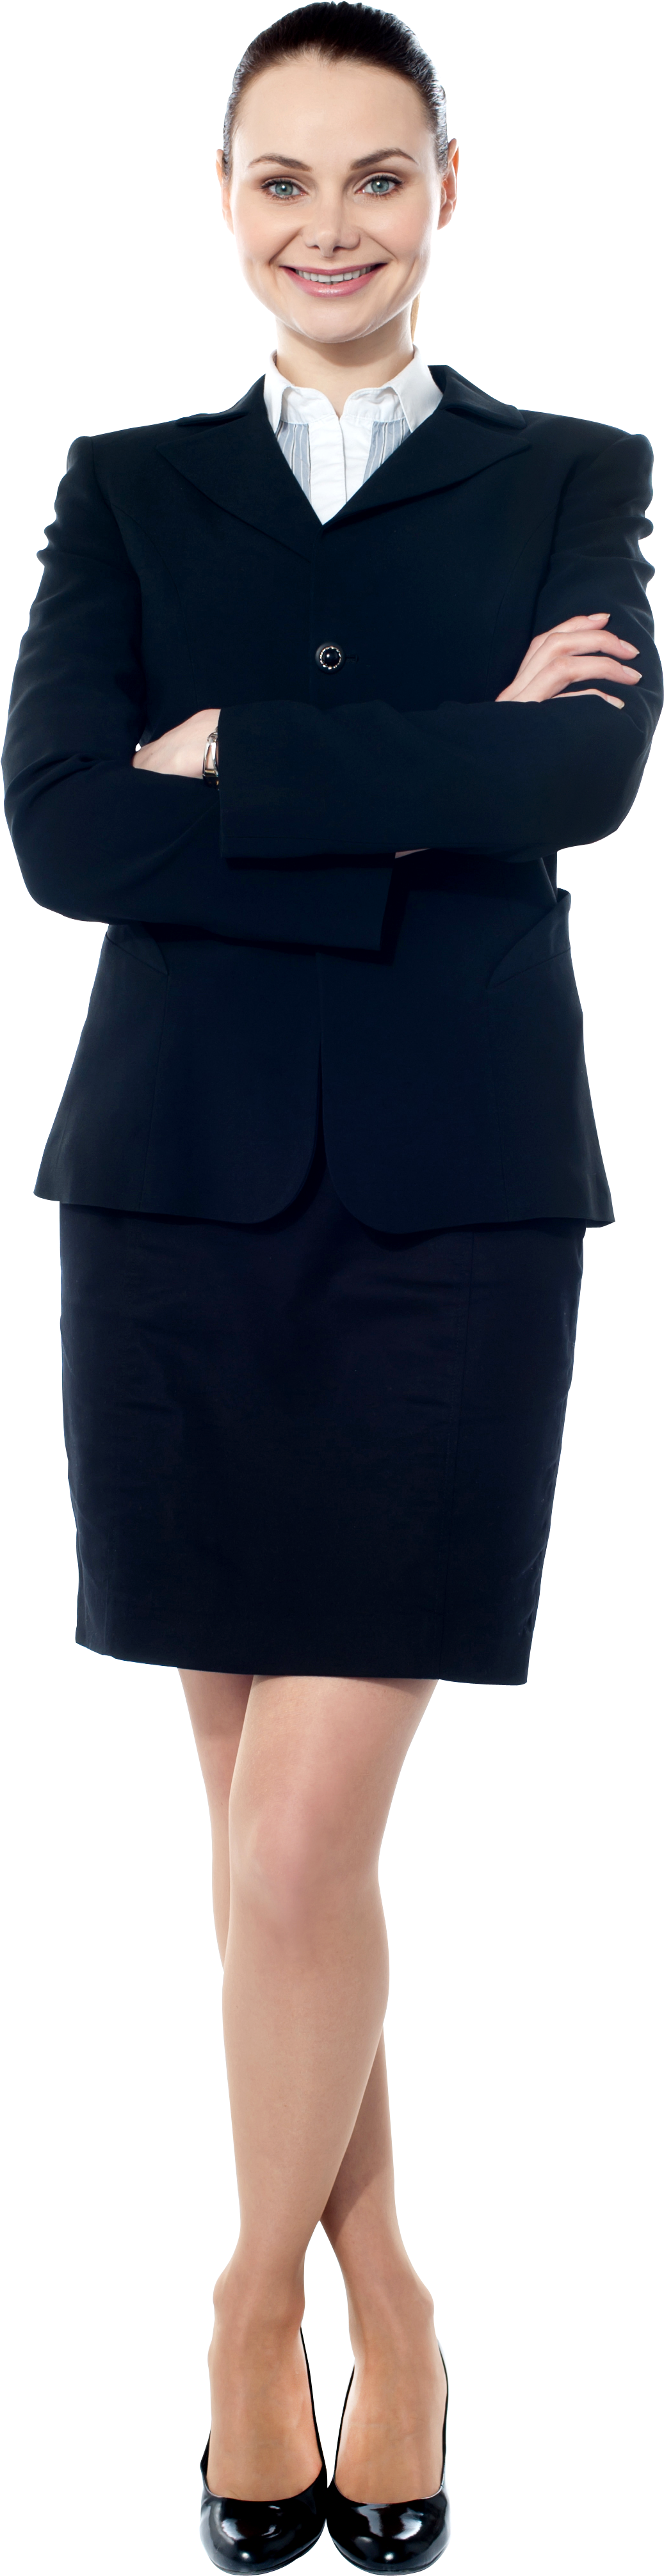 Business Woman Png 1037 X 4025